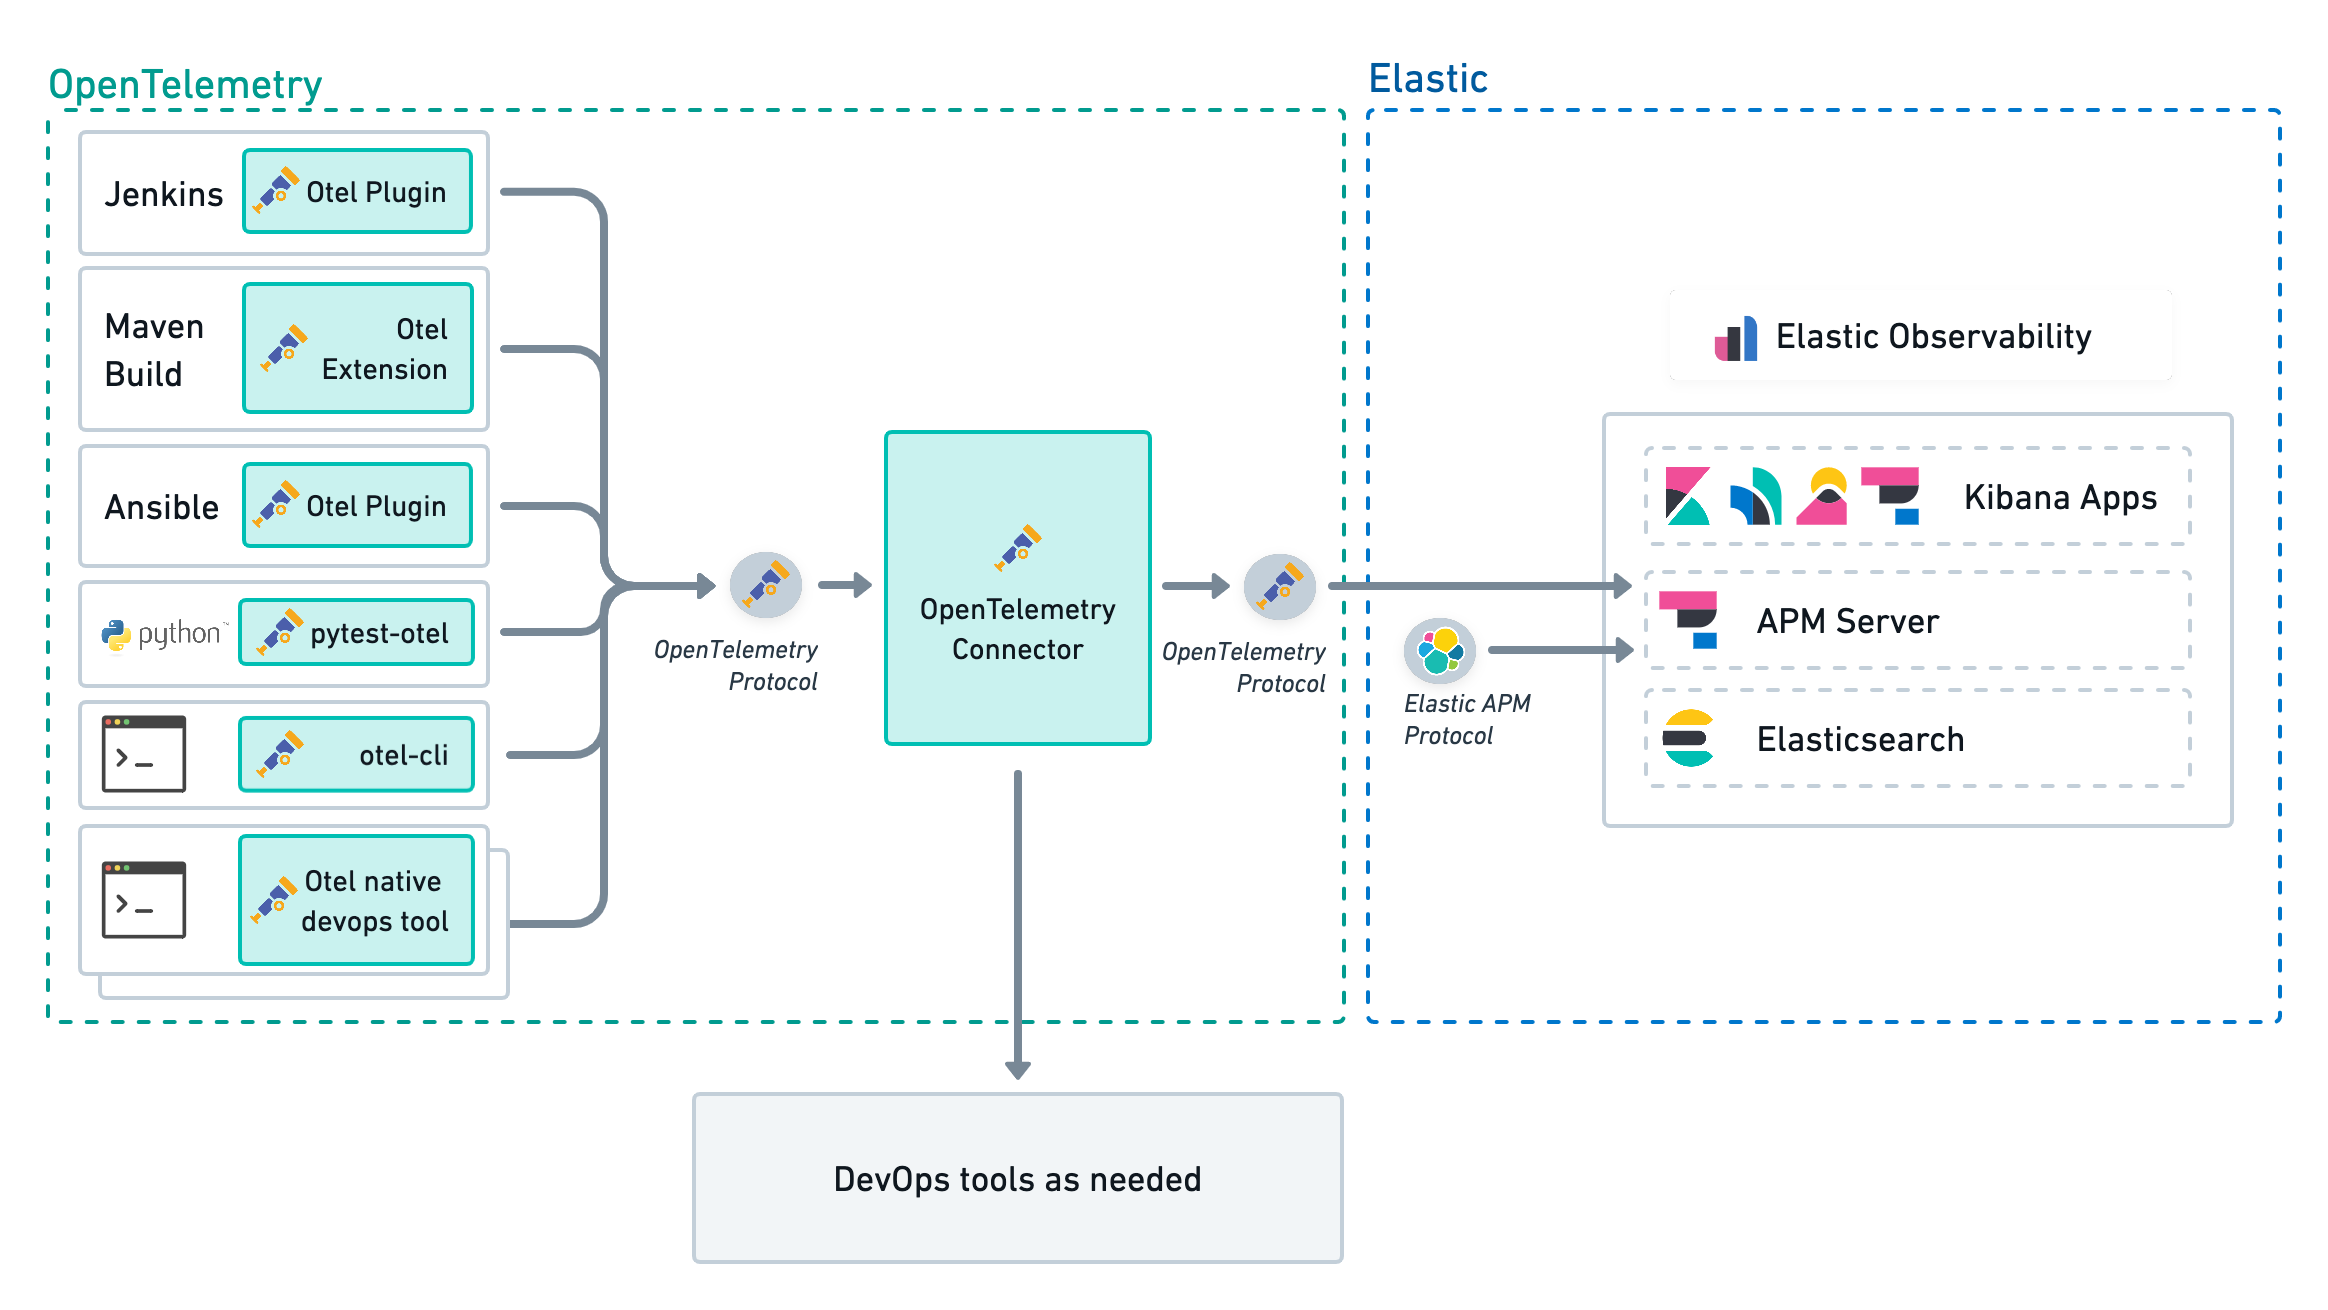 Connect all your OpenTelemetry native CI/CD tools directly to Elastic Observability. An OpenTelemetry Collector deployed on the edge additionally provides the ability to route observability signals to multiple backends in addition to Elastic Observability.